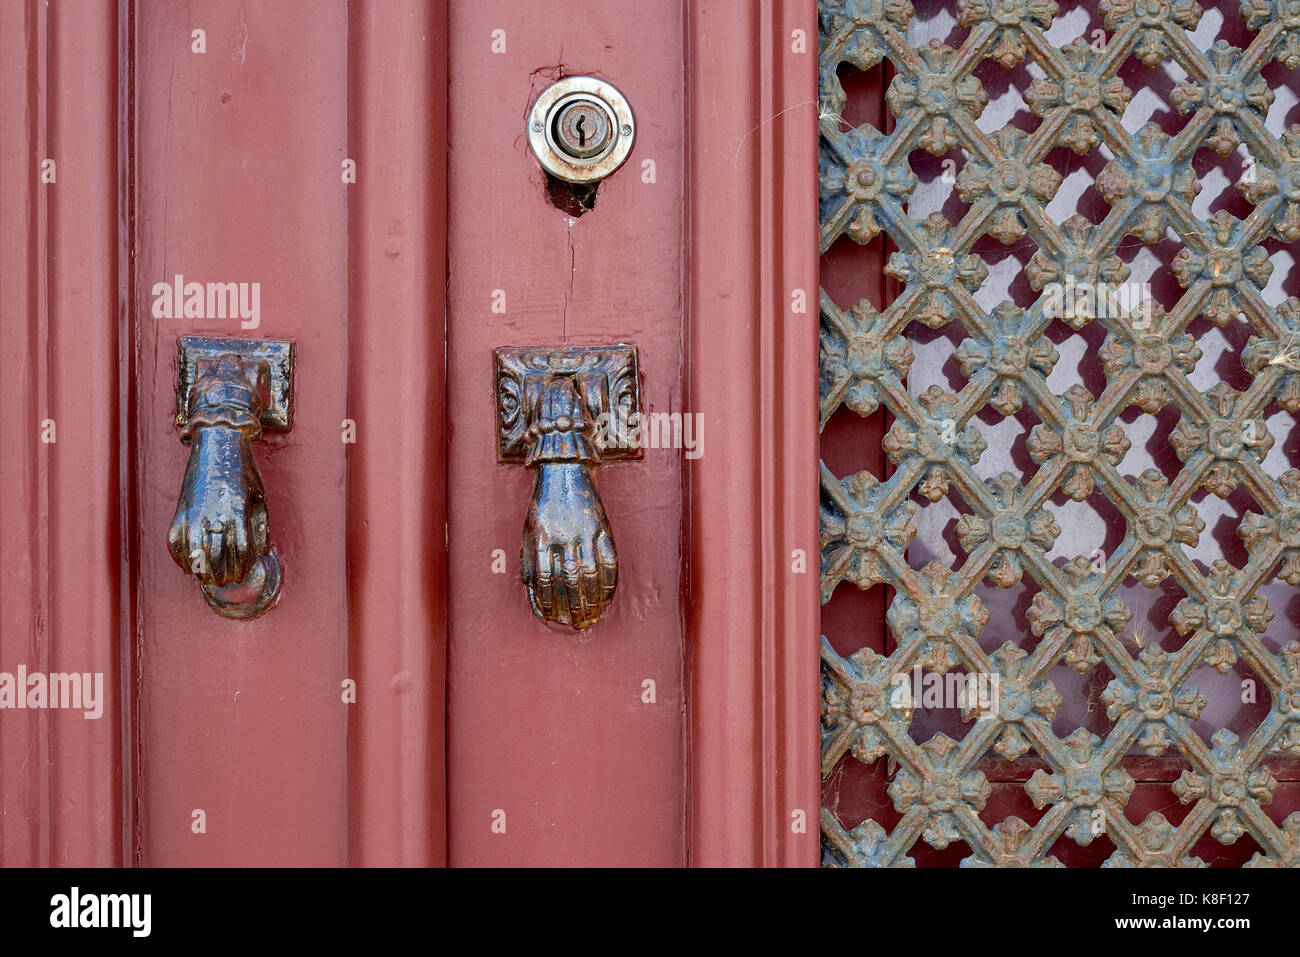 Detail of a red door featuring door knockers in the shape of the Hand of Fatima, in the village of Estoi, Algarve, Portugal. Stock Photo